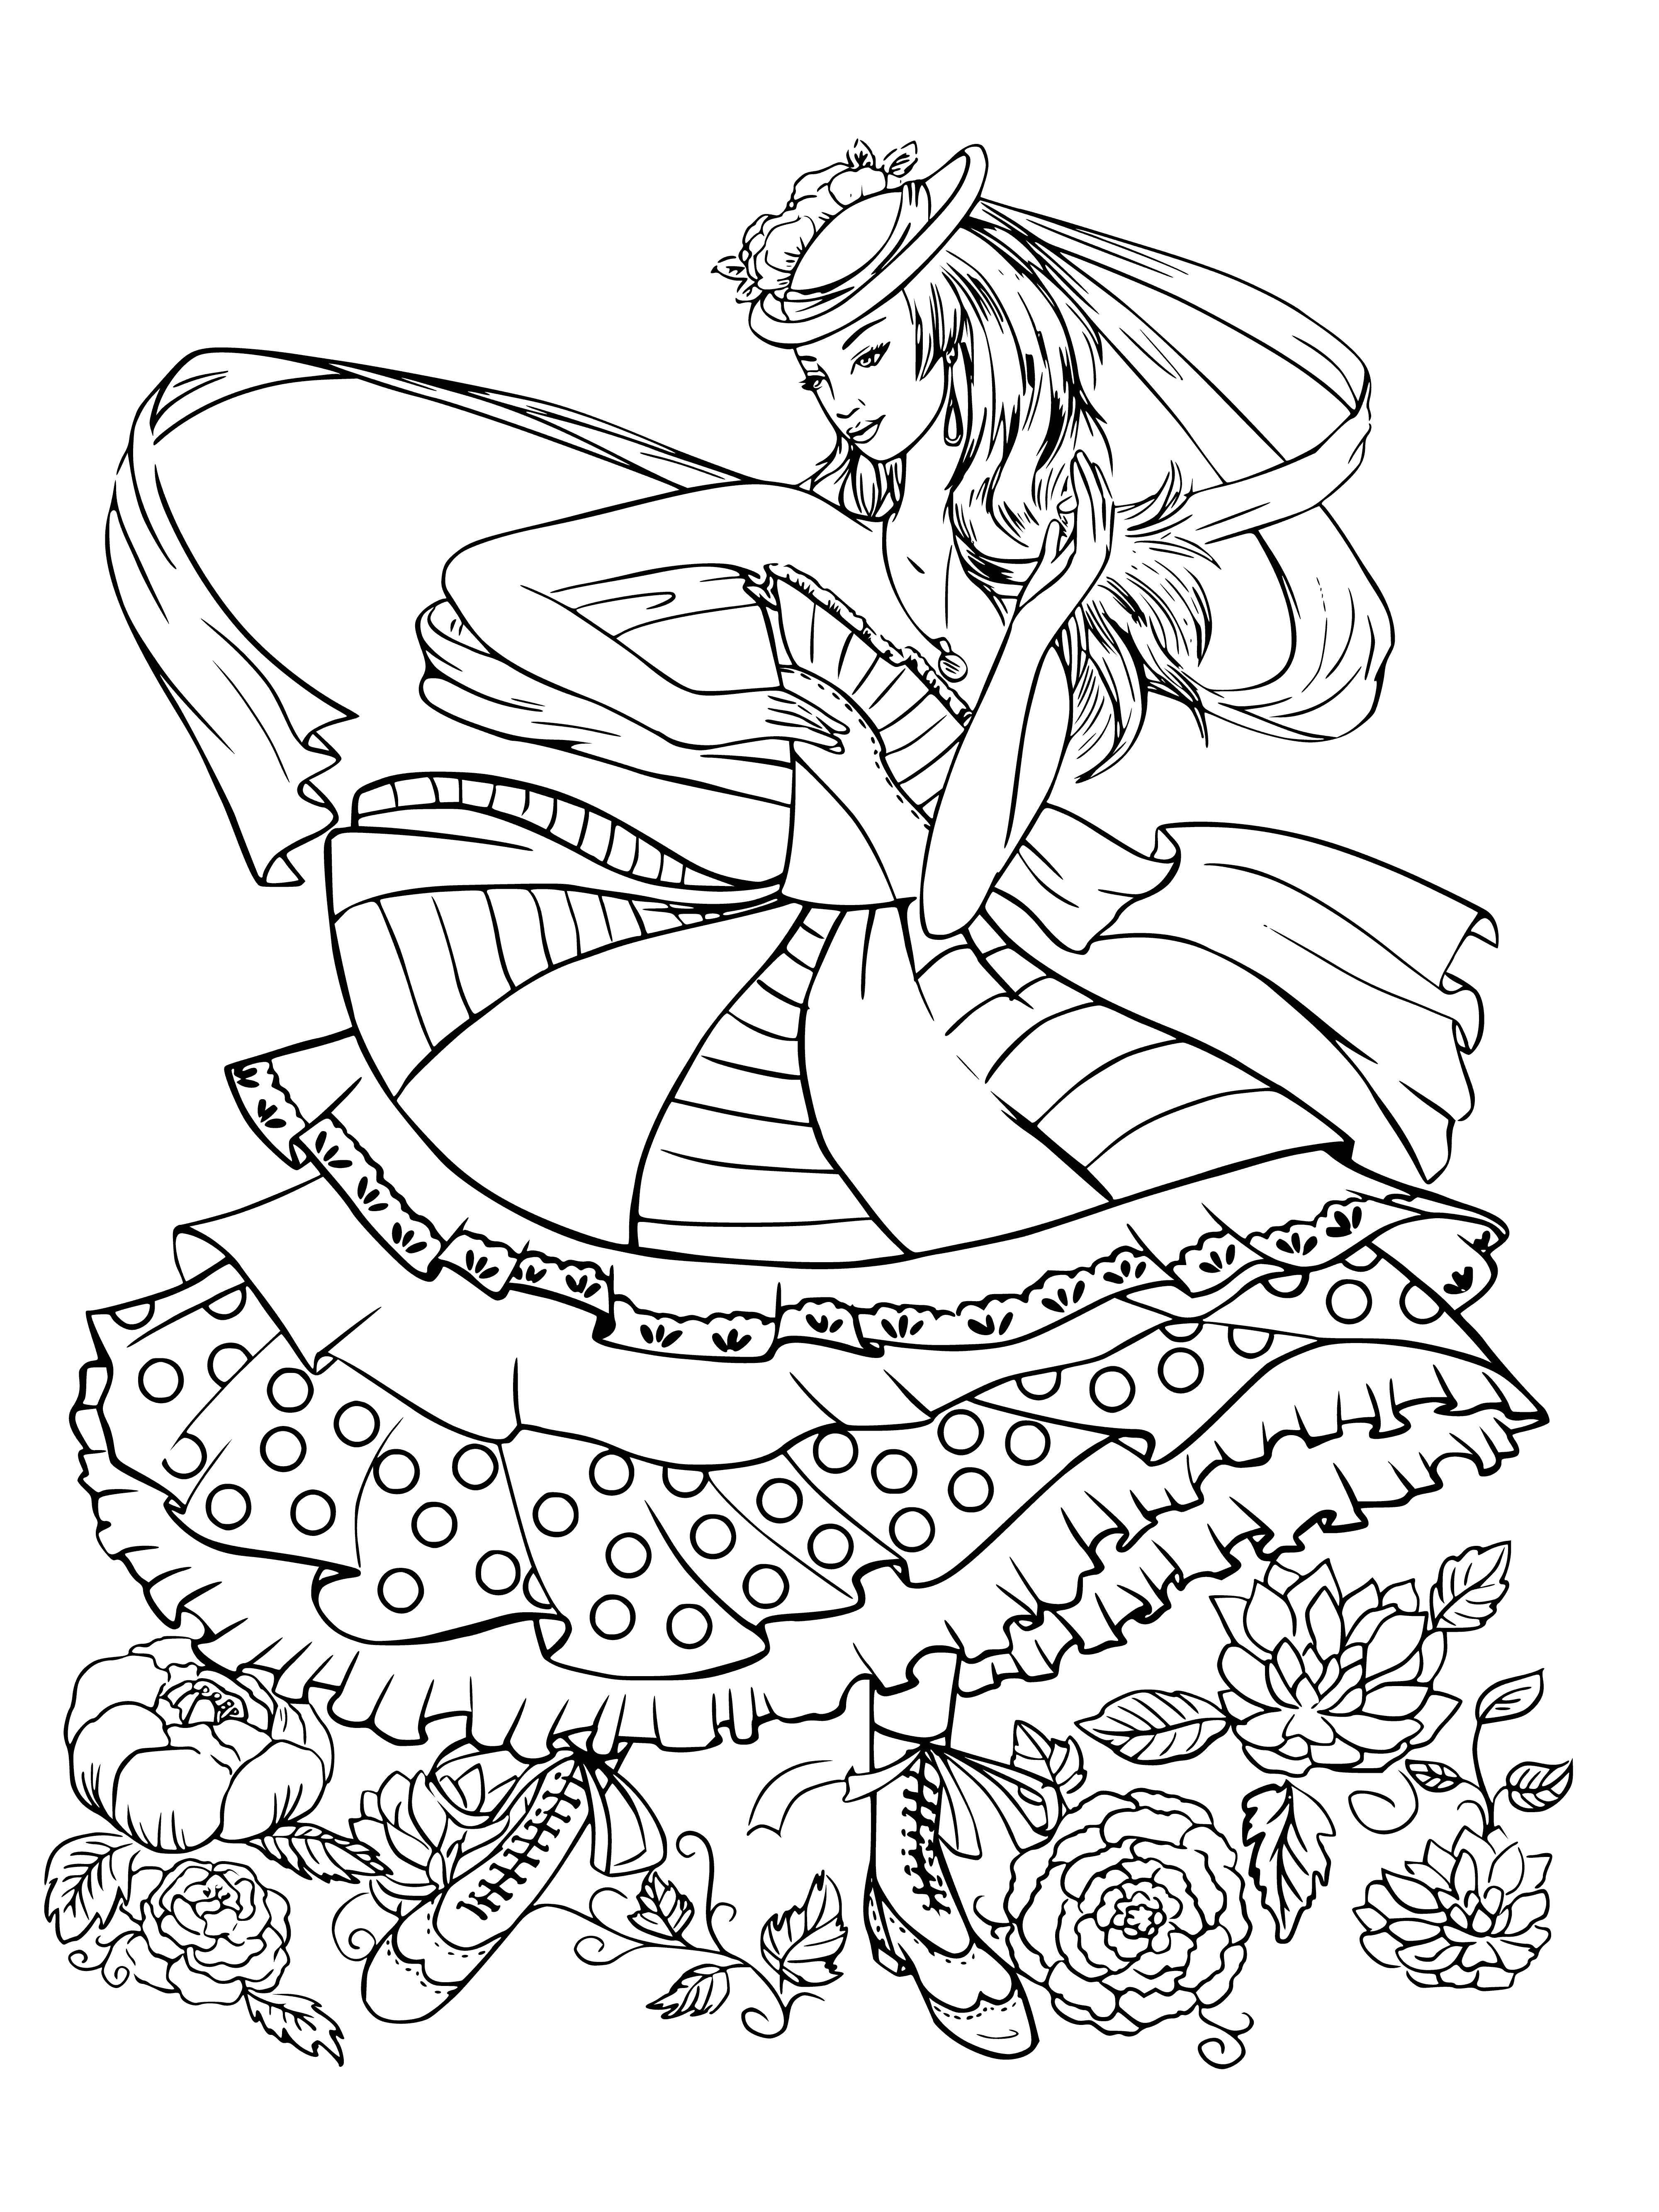 coloring page: Girl in a hat wearing a flower, carefree expression, hair blowing in the wind, background of swirls and geometric shapes. #adultcoloringpages